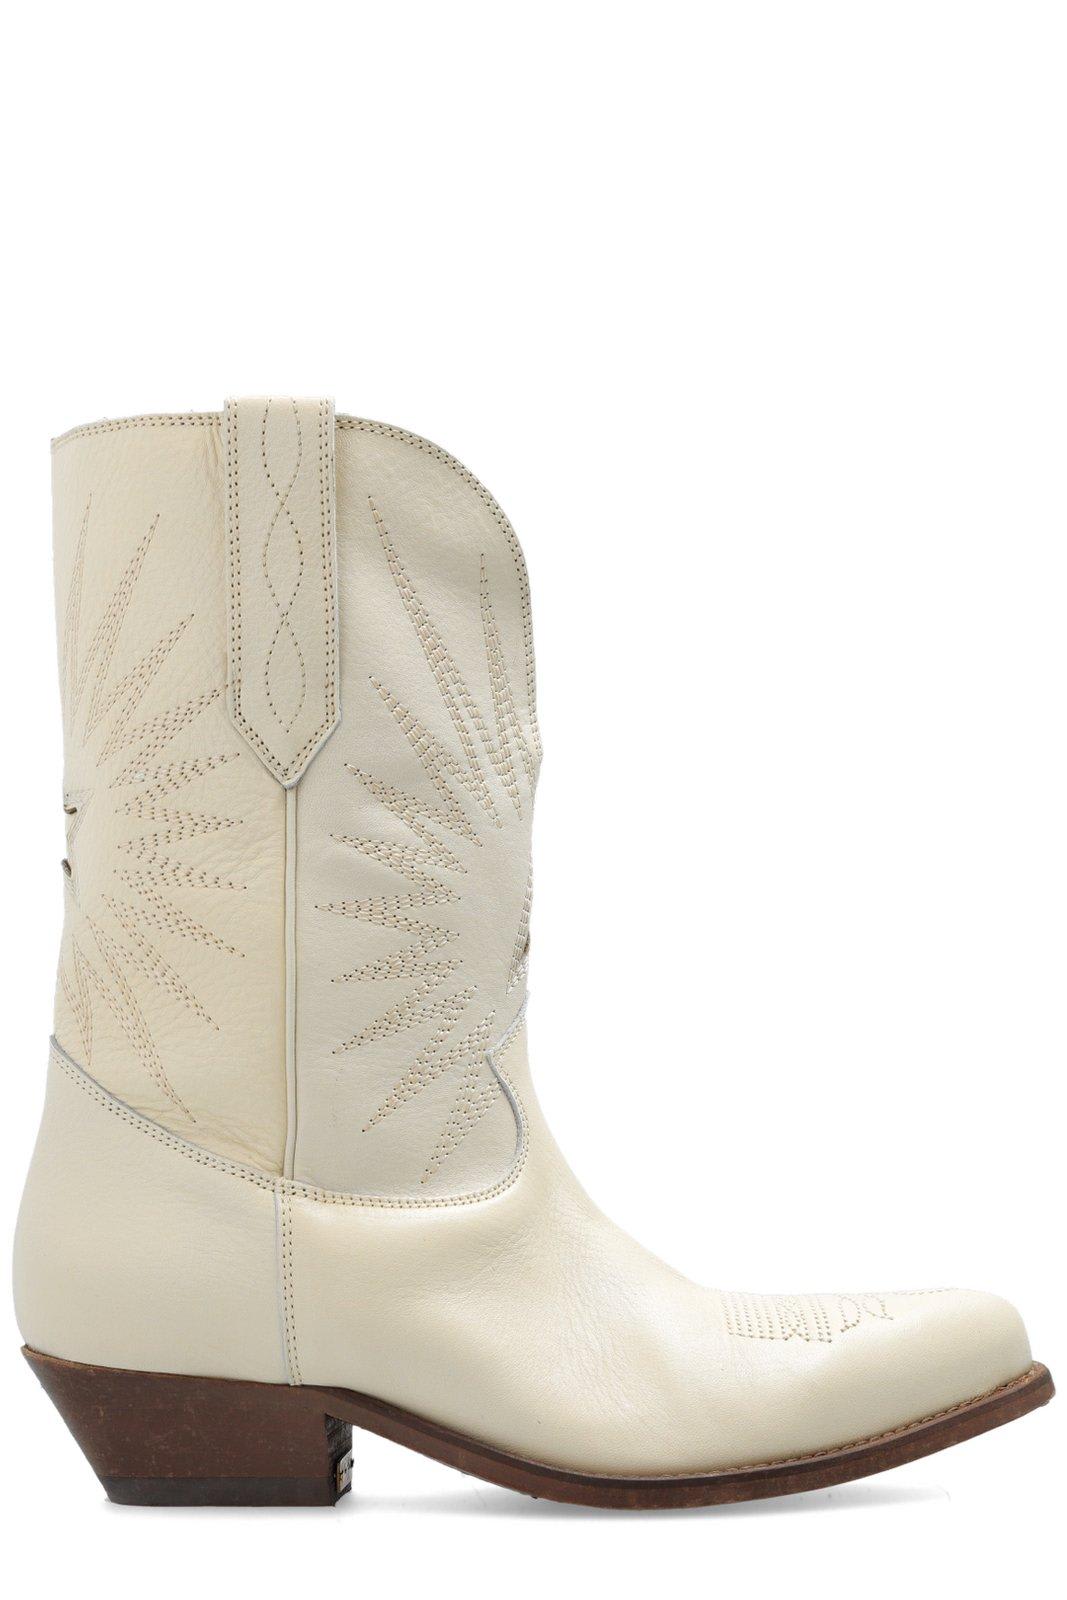 GOLDEN GOOSE LOW WISH STAR COWBOY BOOTS